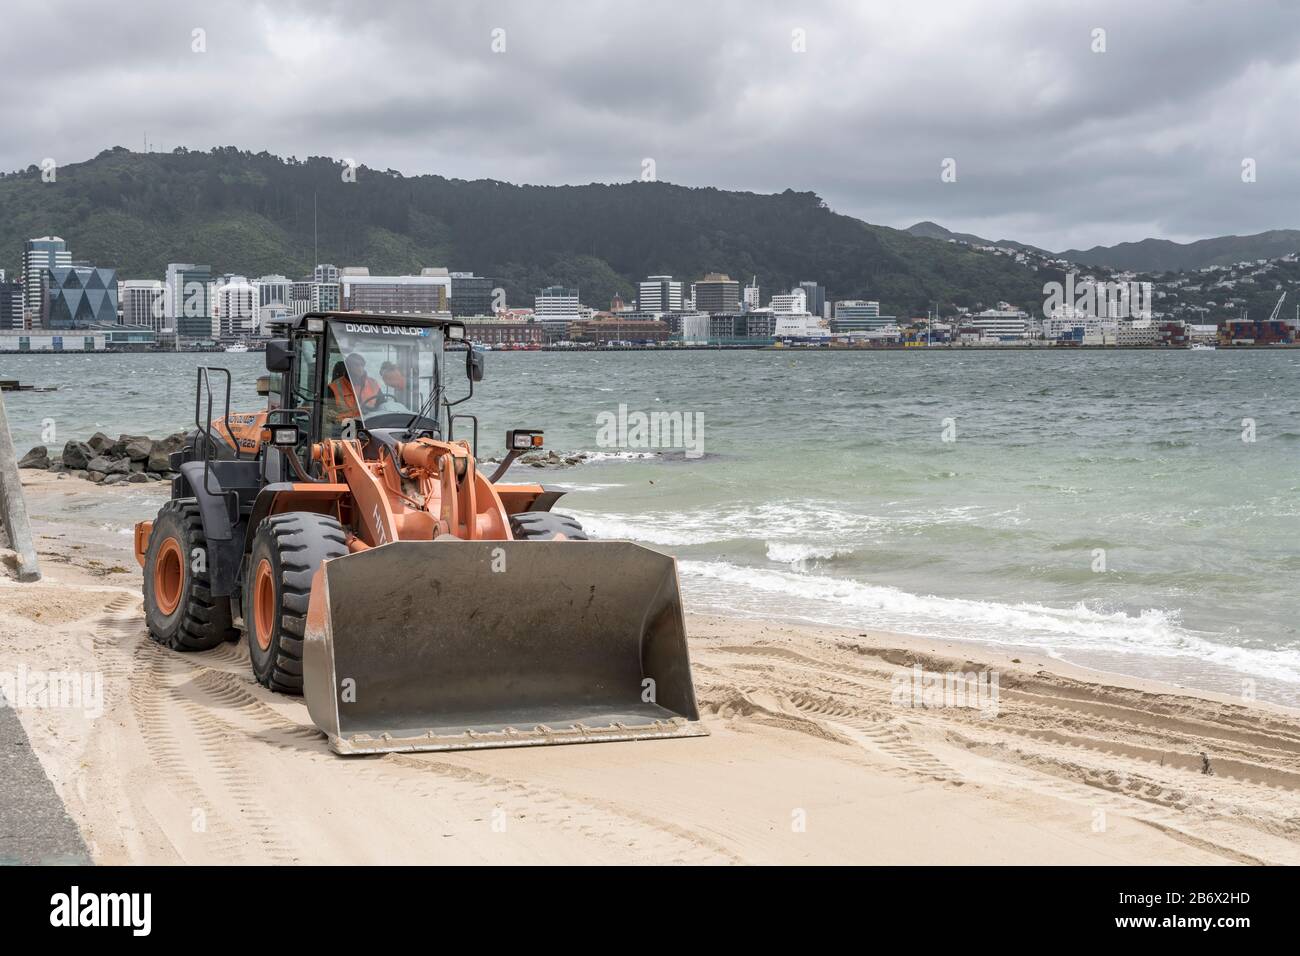 WELLINGTON, NEW ZEALAND - November 13 2019: cityscape with bulldozer evening out sand beach on bay shore at Oriental Parade neighborhood, shot in brig Stock Photo